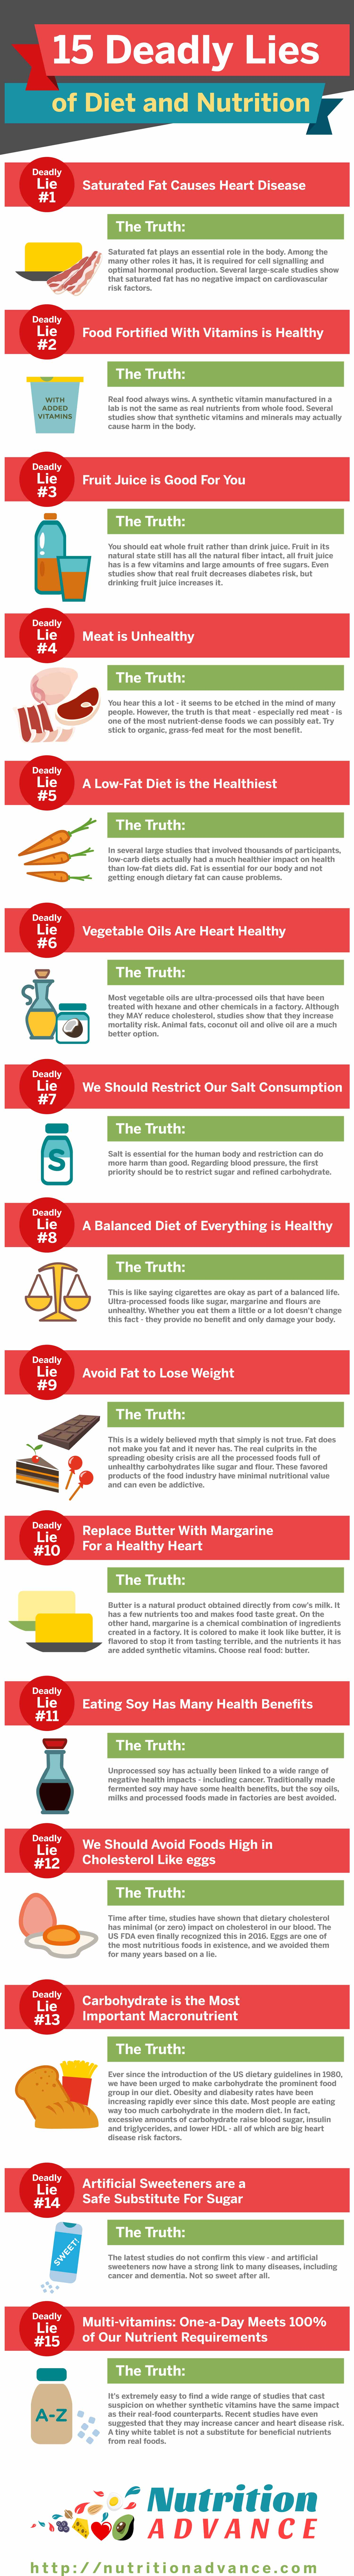 15 Deadly Lies of Diet and Nutrition